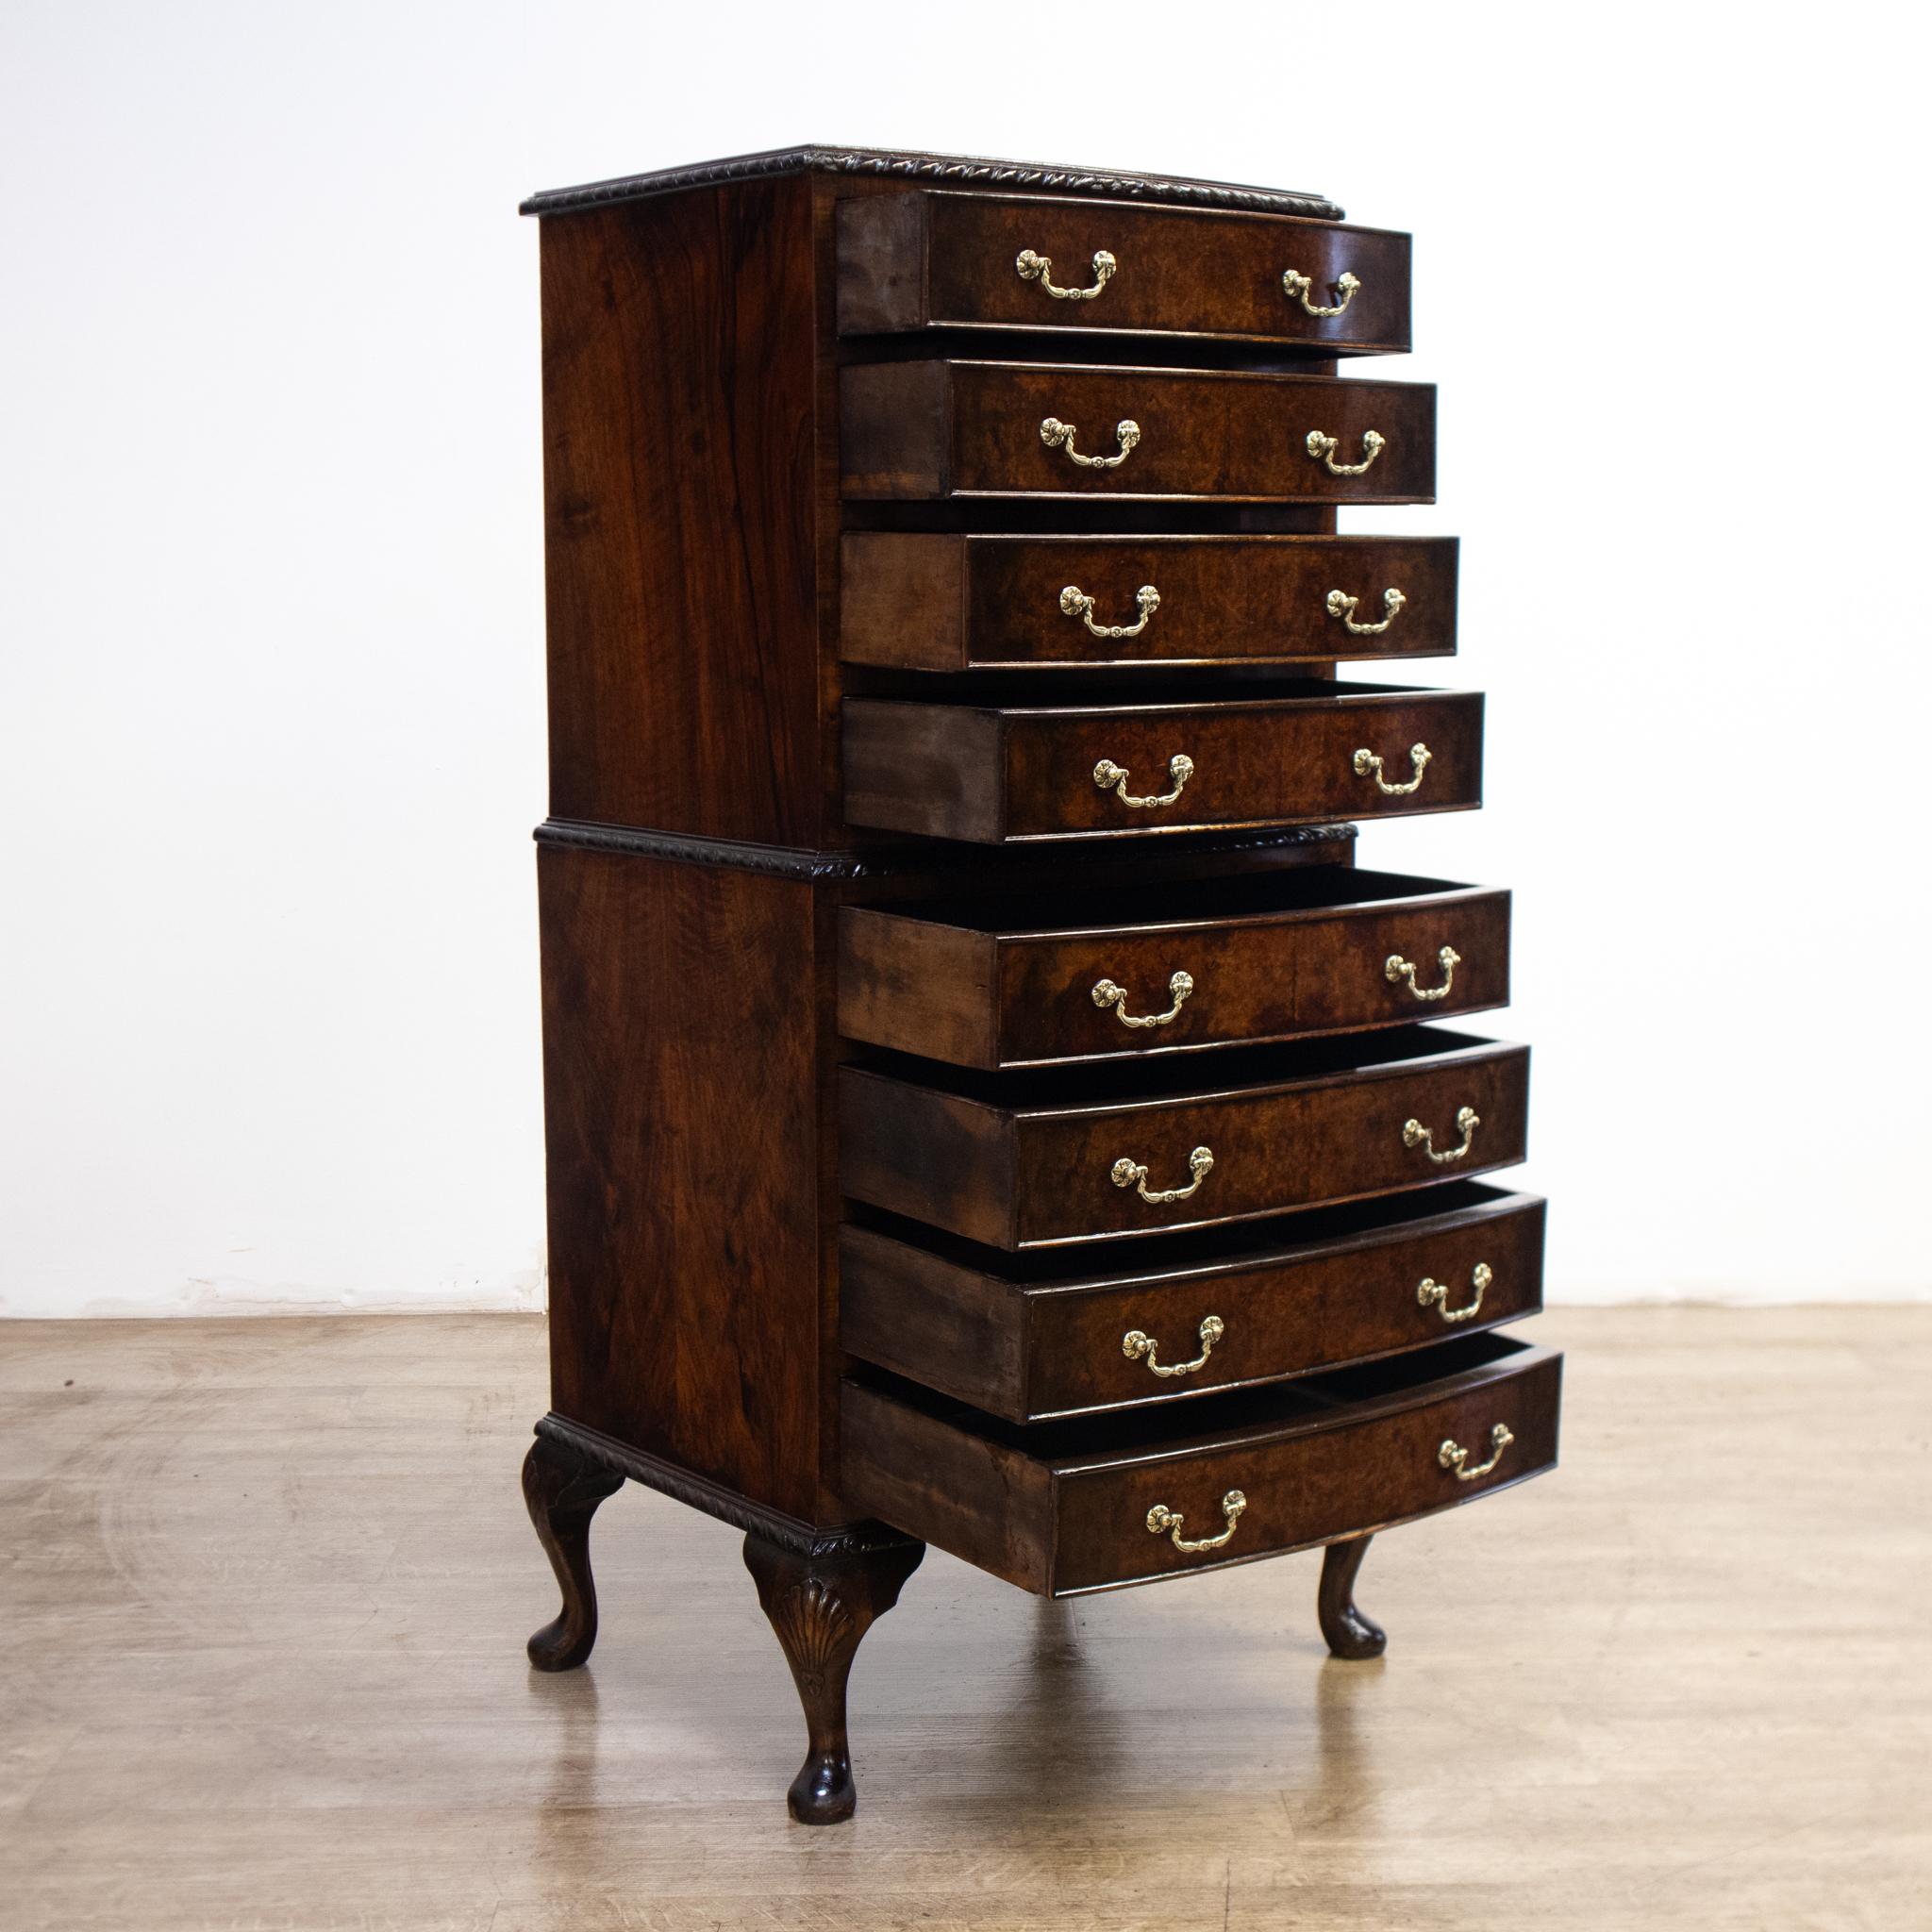 An attractive piece of storage furniture, this early 20th century set of drawers is relatively small and narrow and will make a great set of drawers for any space, ideal for smaller items in the bedroom, additional drawer capacity in an office, or